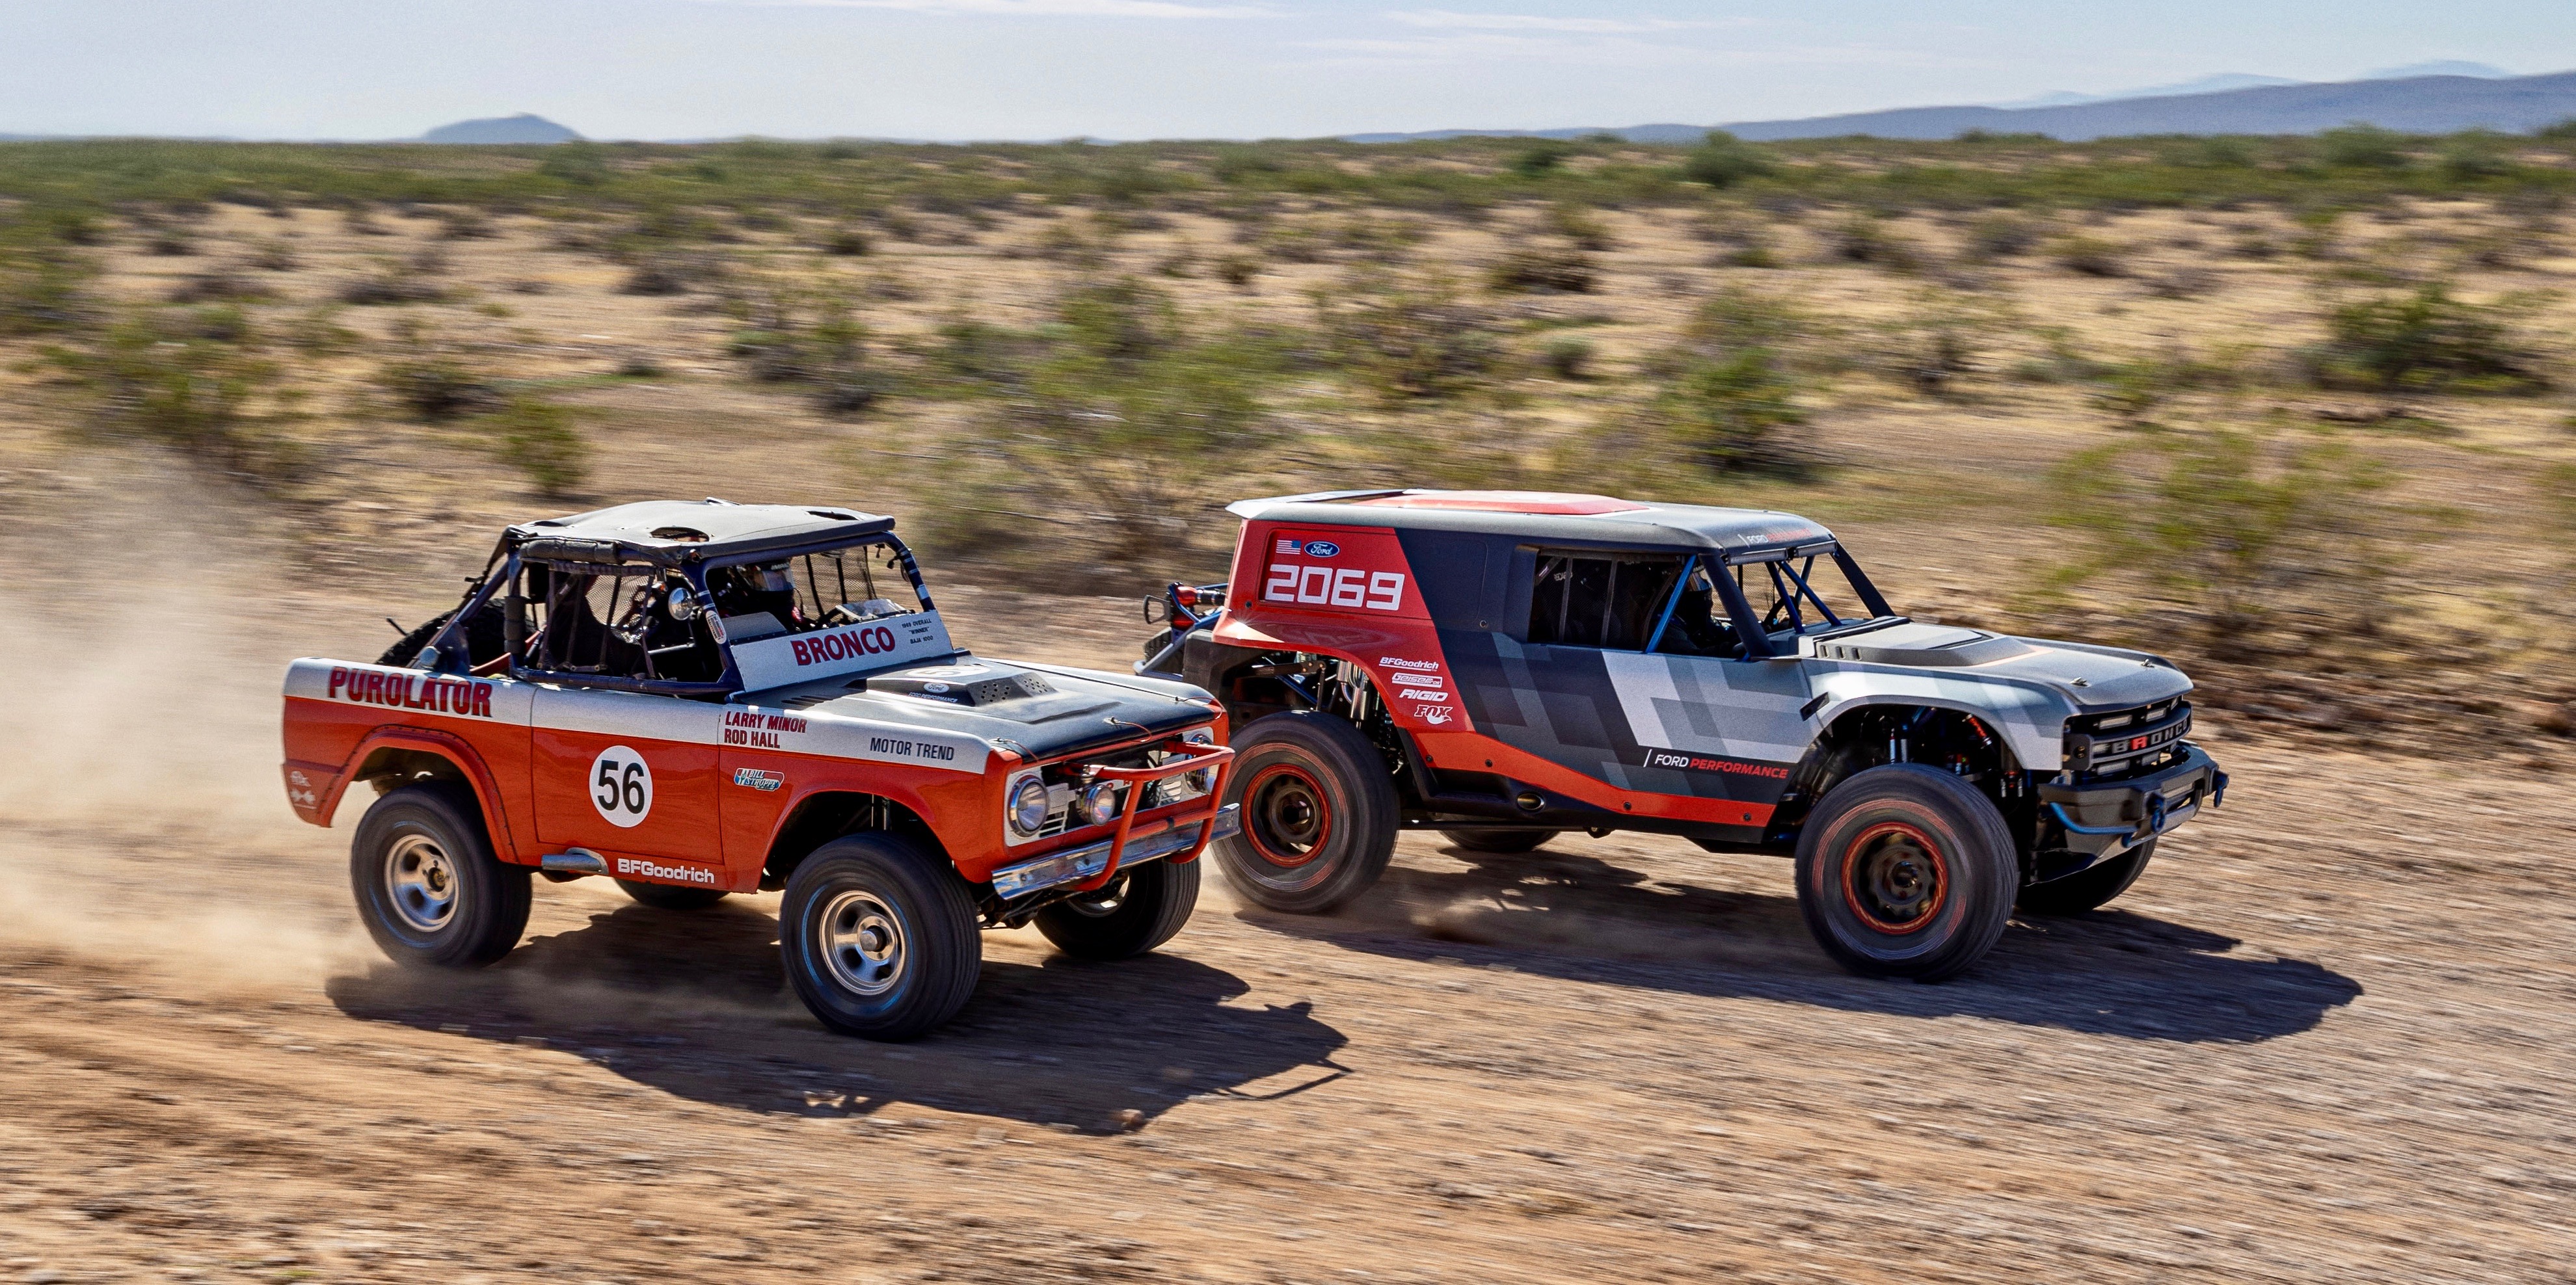 SEMA, Ford uses SEMA to heighten anticipation of new Bronco, ClassicCars.com Journal